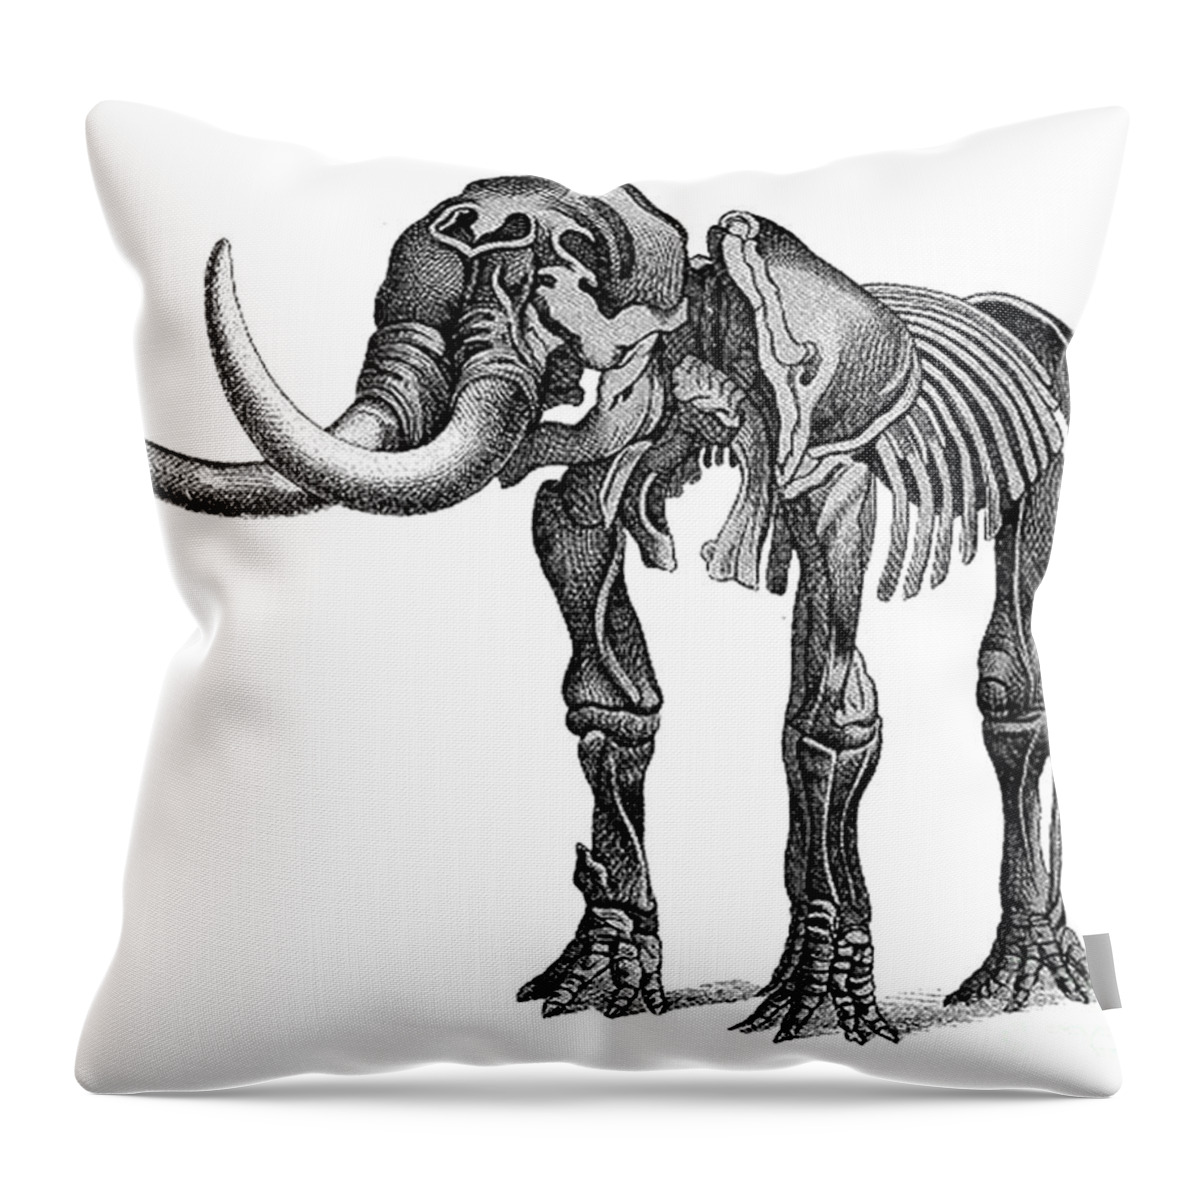 Prehistory Throw Pillow featuring the photograph Mastodon, Cenozoic Mammal by Science Source